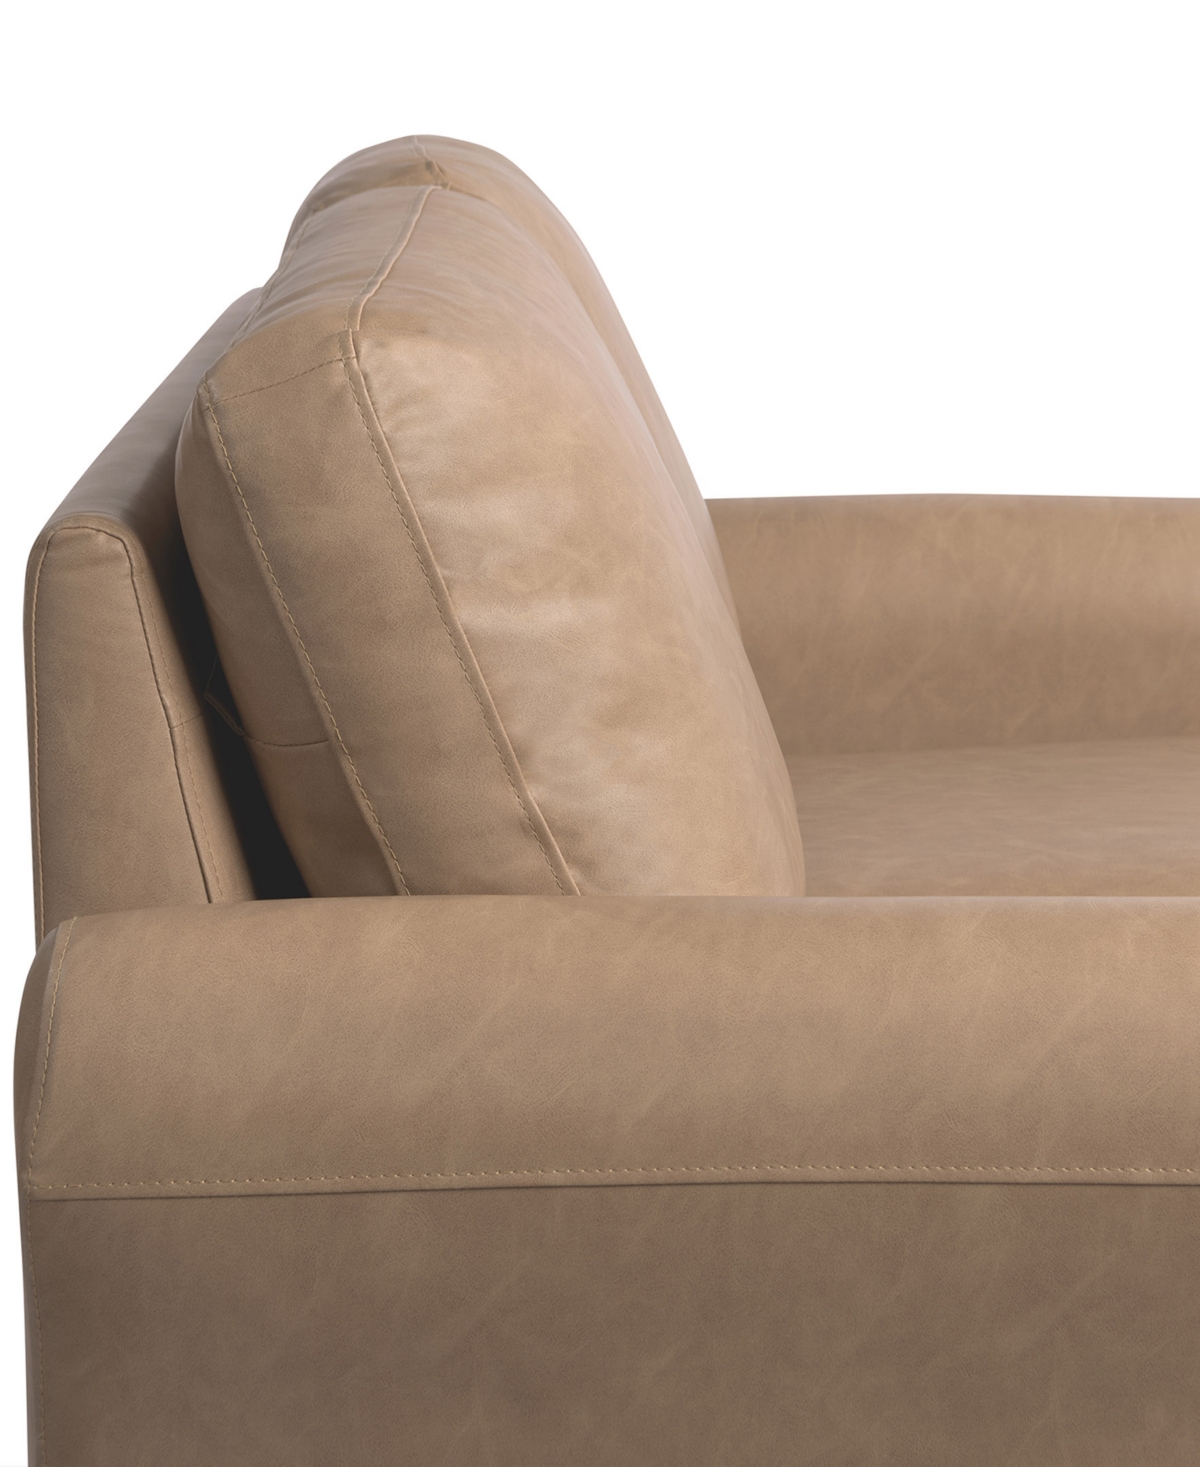 Shop Lifestyle Solutions 57.9" W Faux Leather Wilshire Loveseat With Rolled Arms In Light Brown